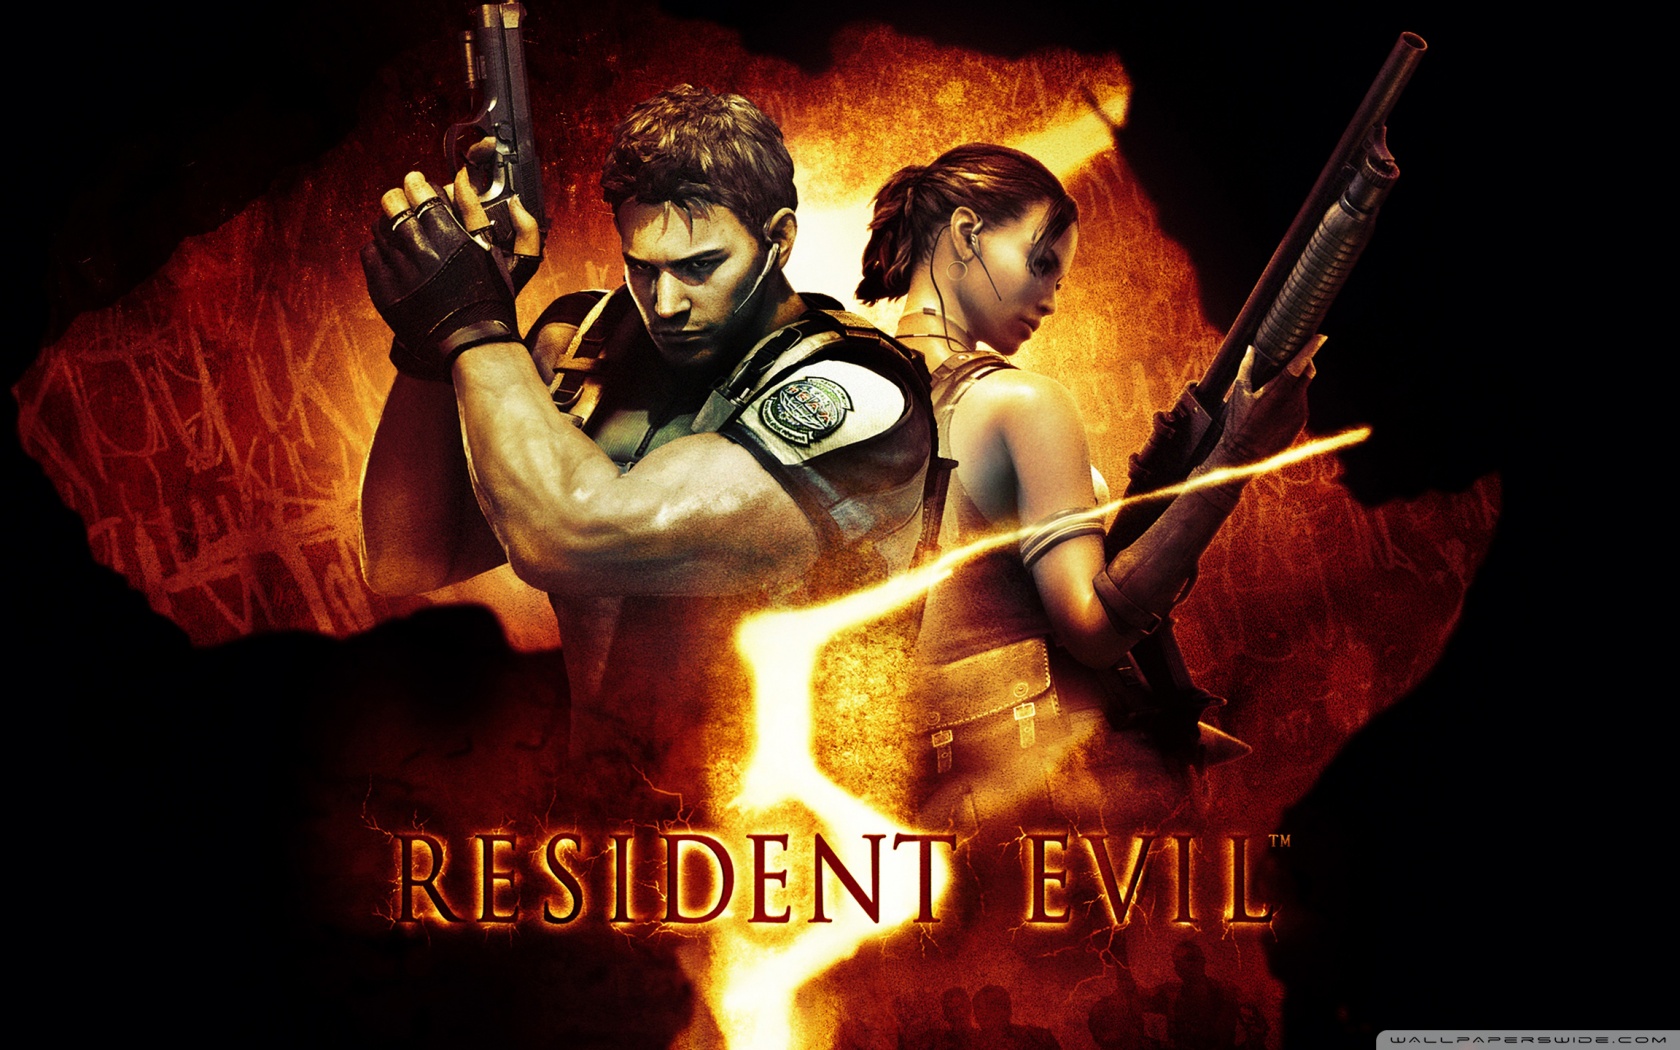 Resident evil 5 to steam (118) фото